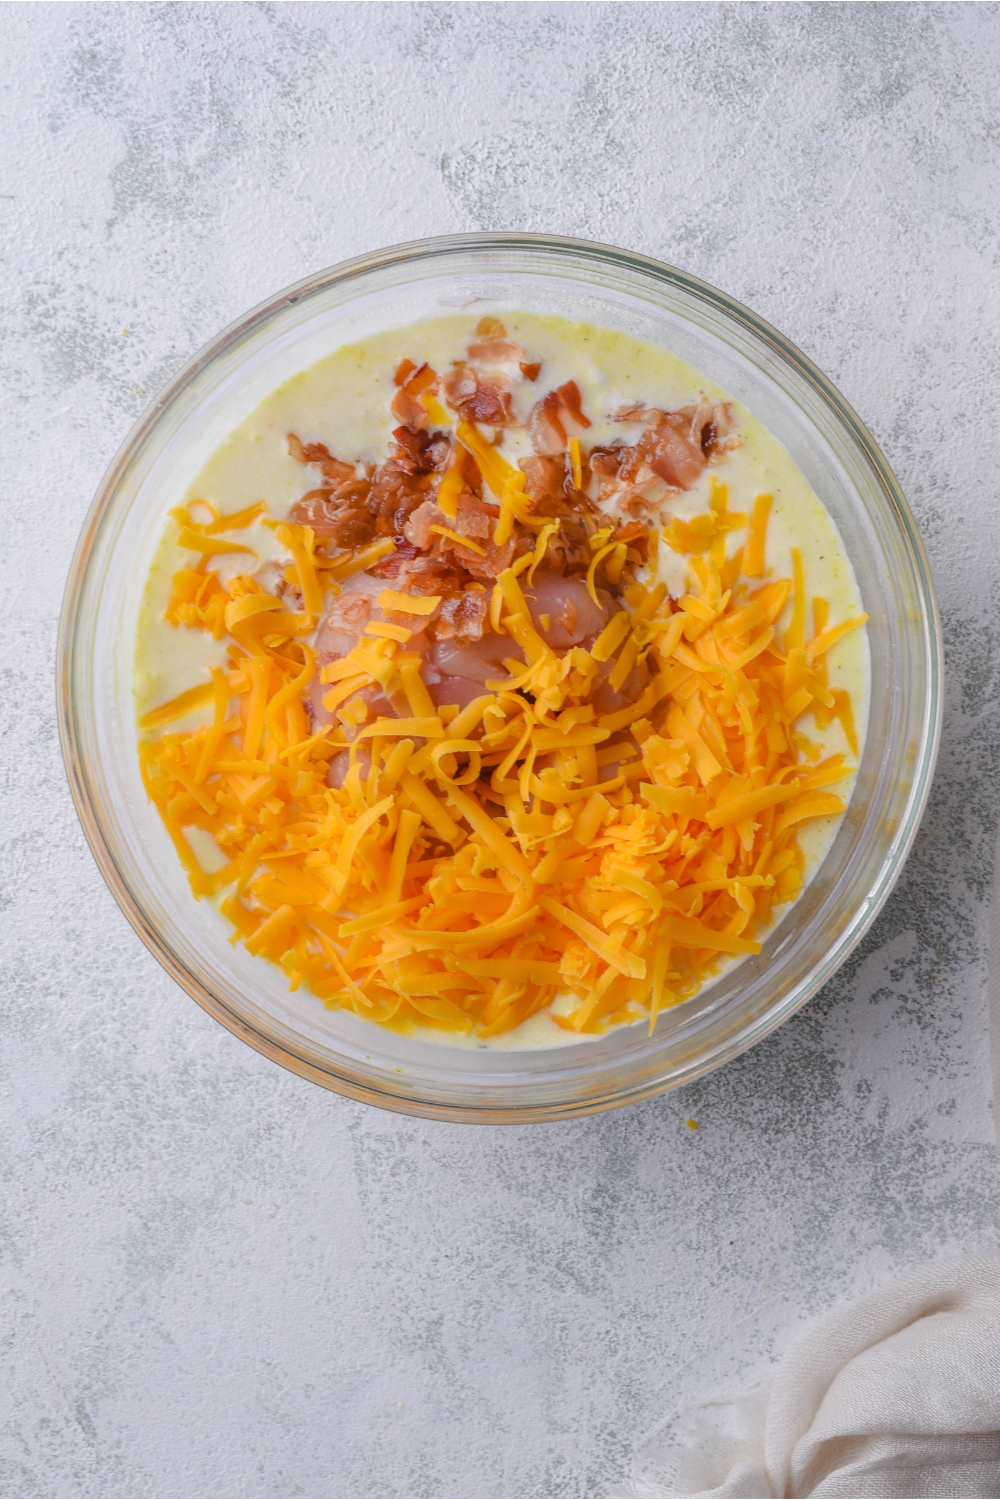 A clear bowl filled with chopped bacon and shredded cheddar cheese in a yellow cream sauce.